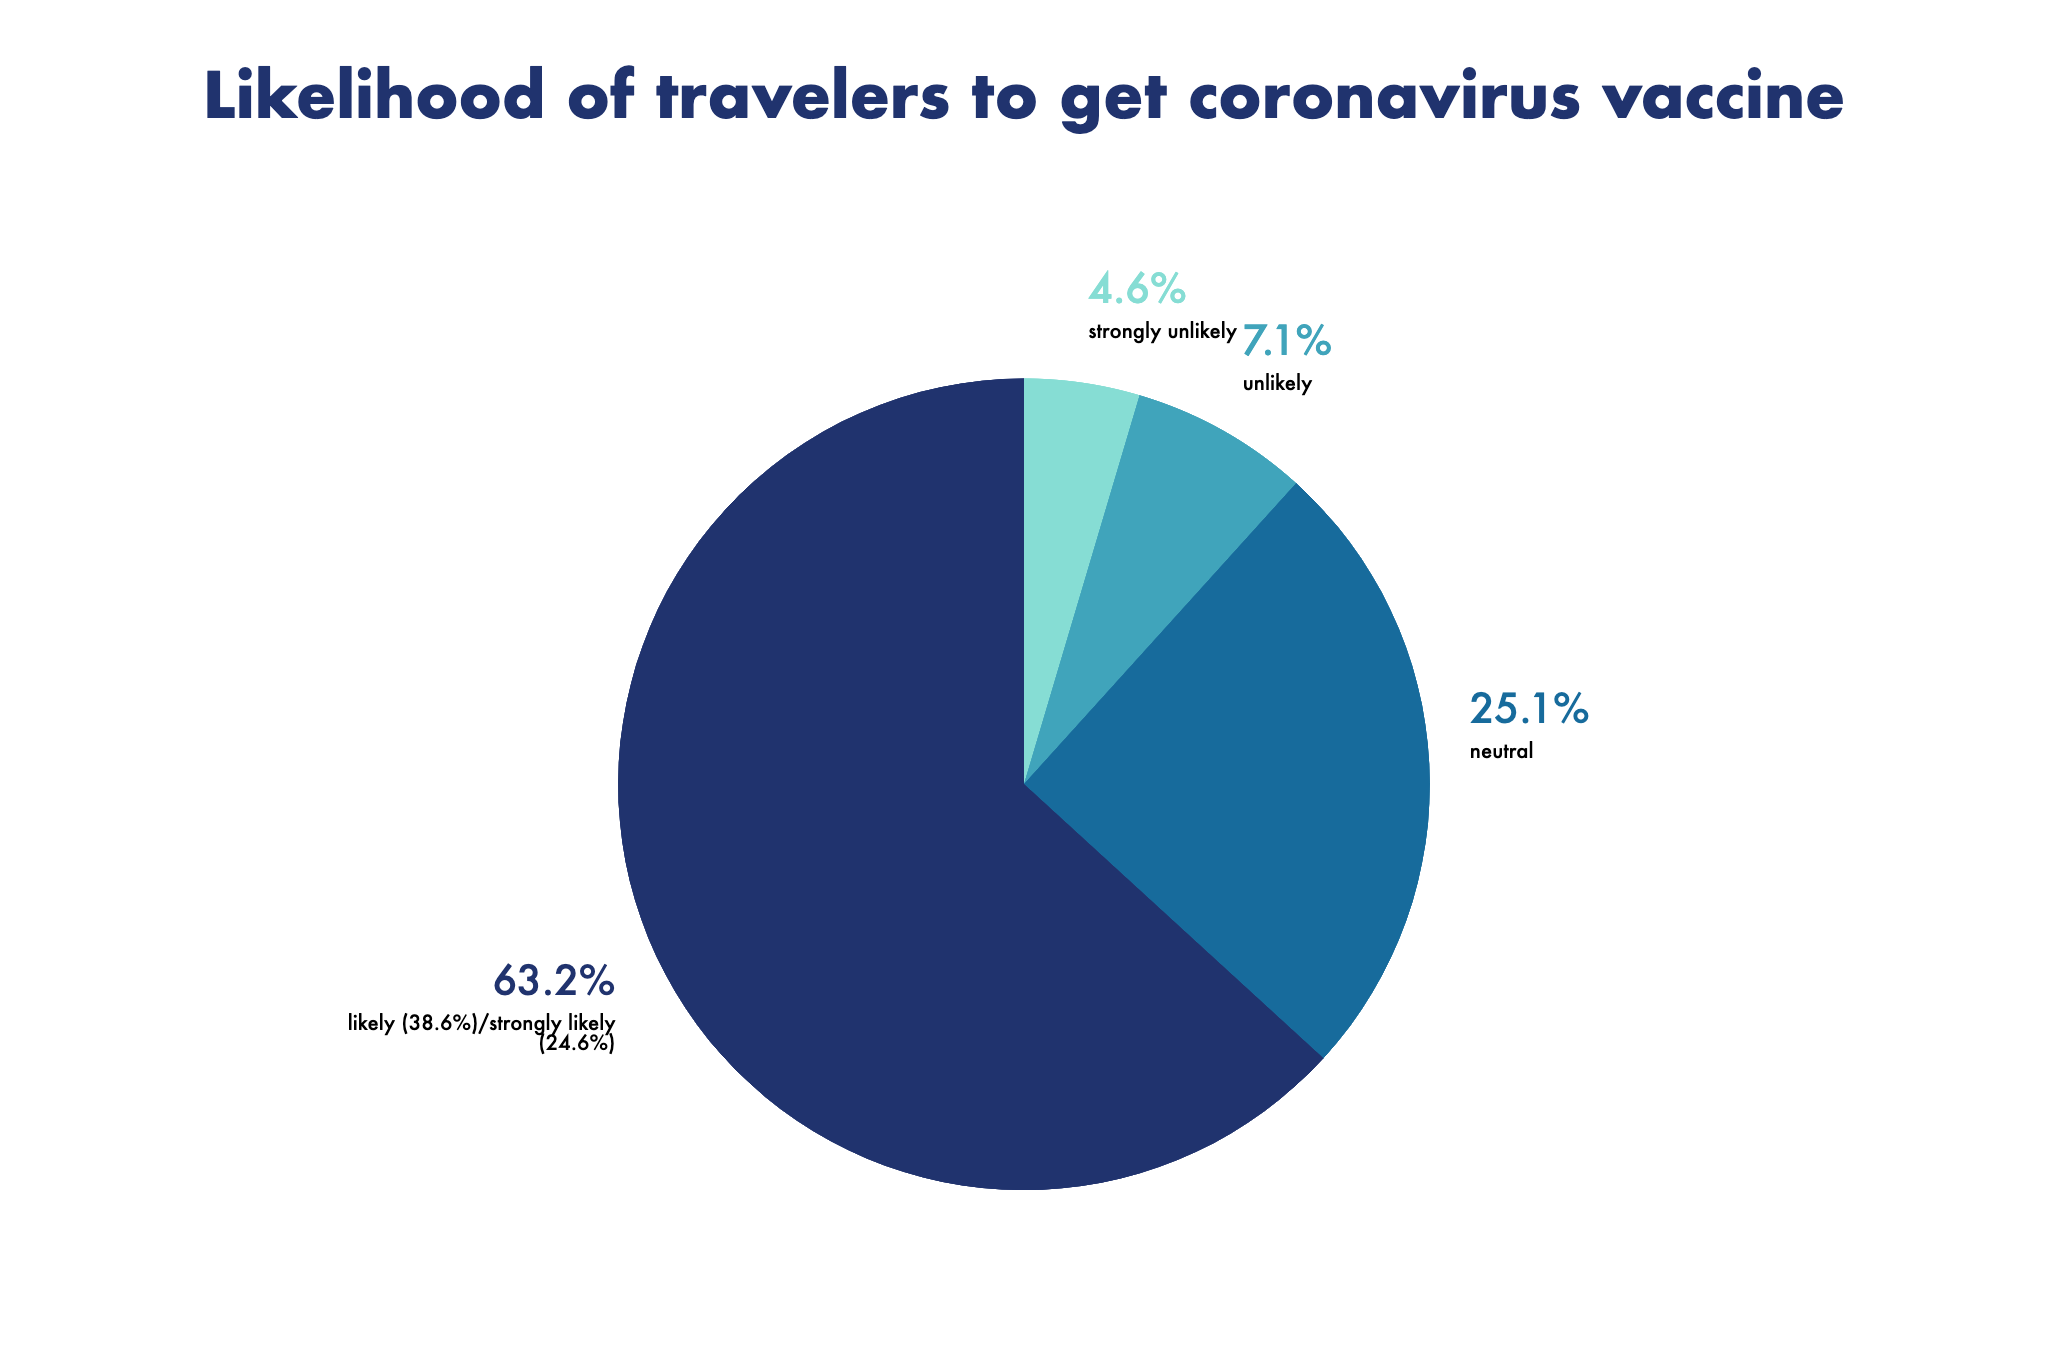 most travelers said they were likely or very likely to get a coronavirus vaccine